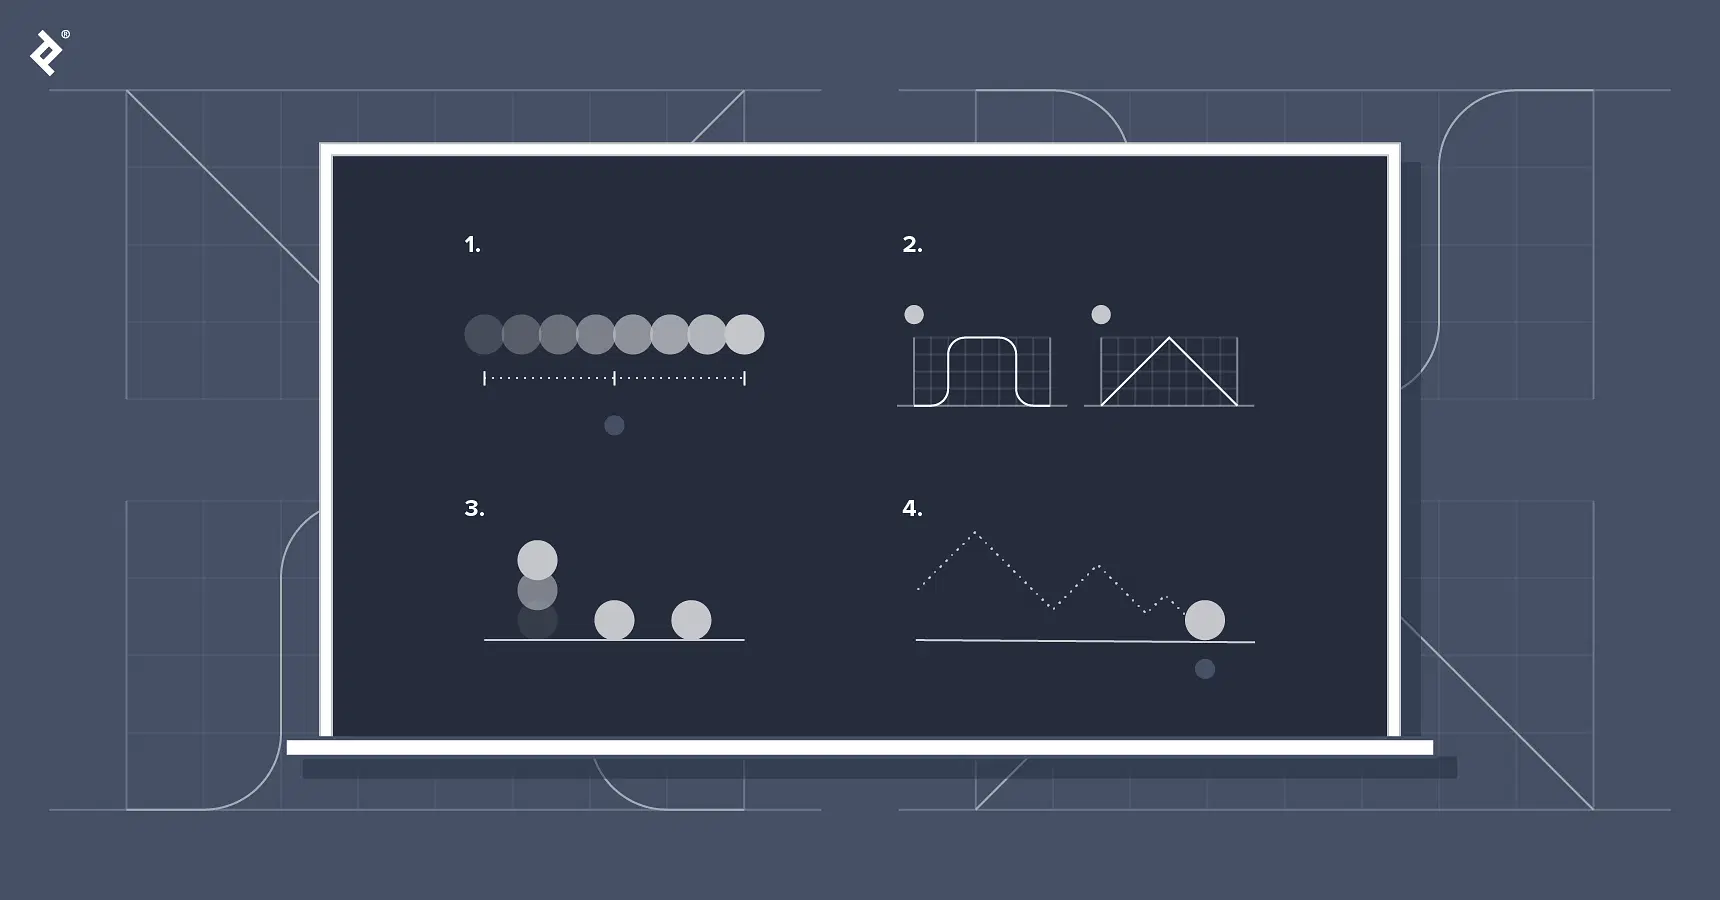 A Guide to Motion Design Principles